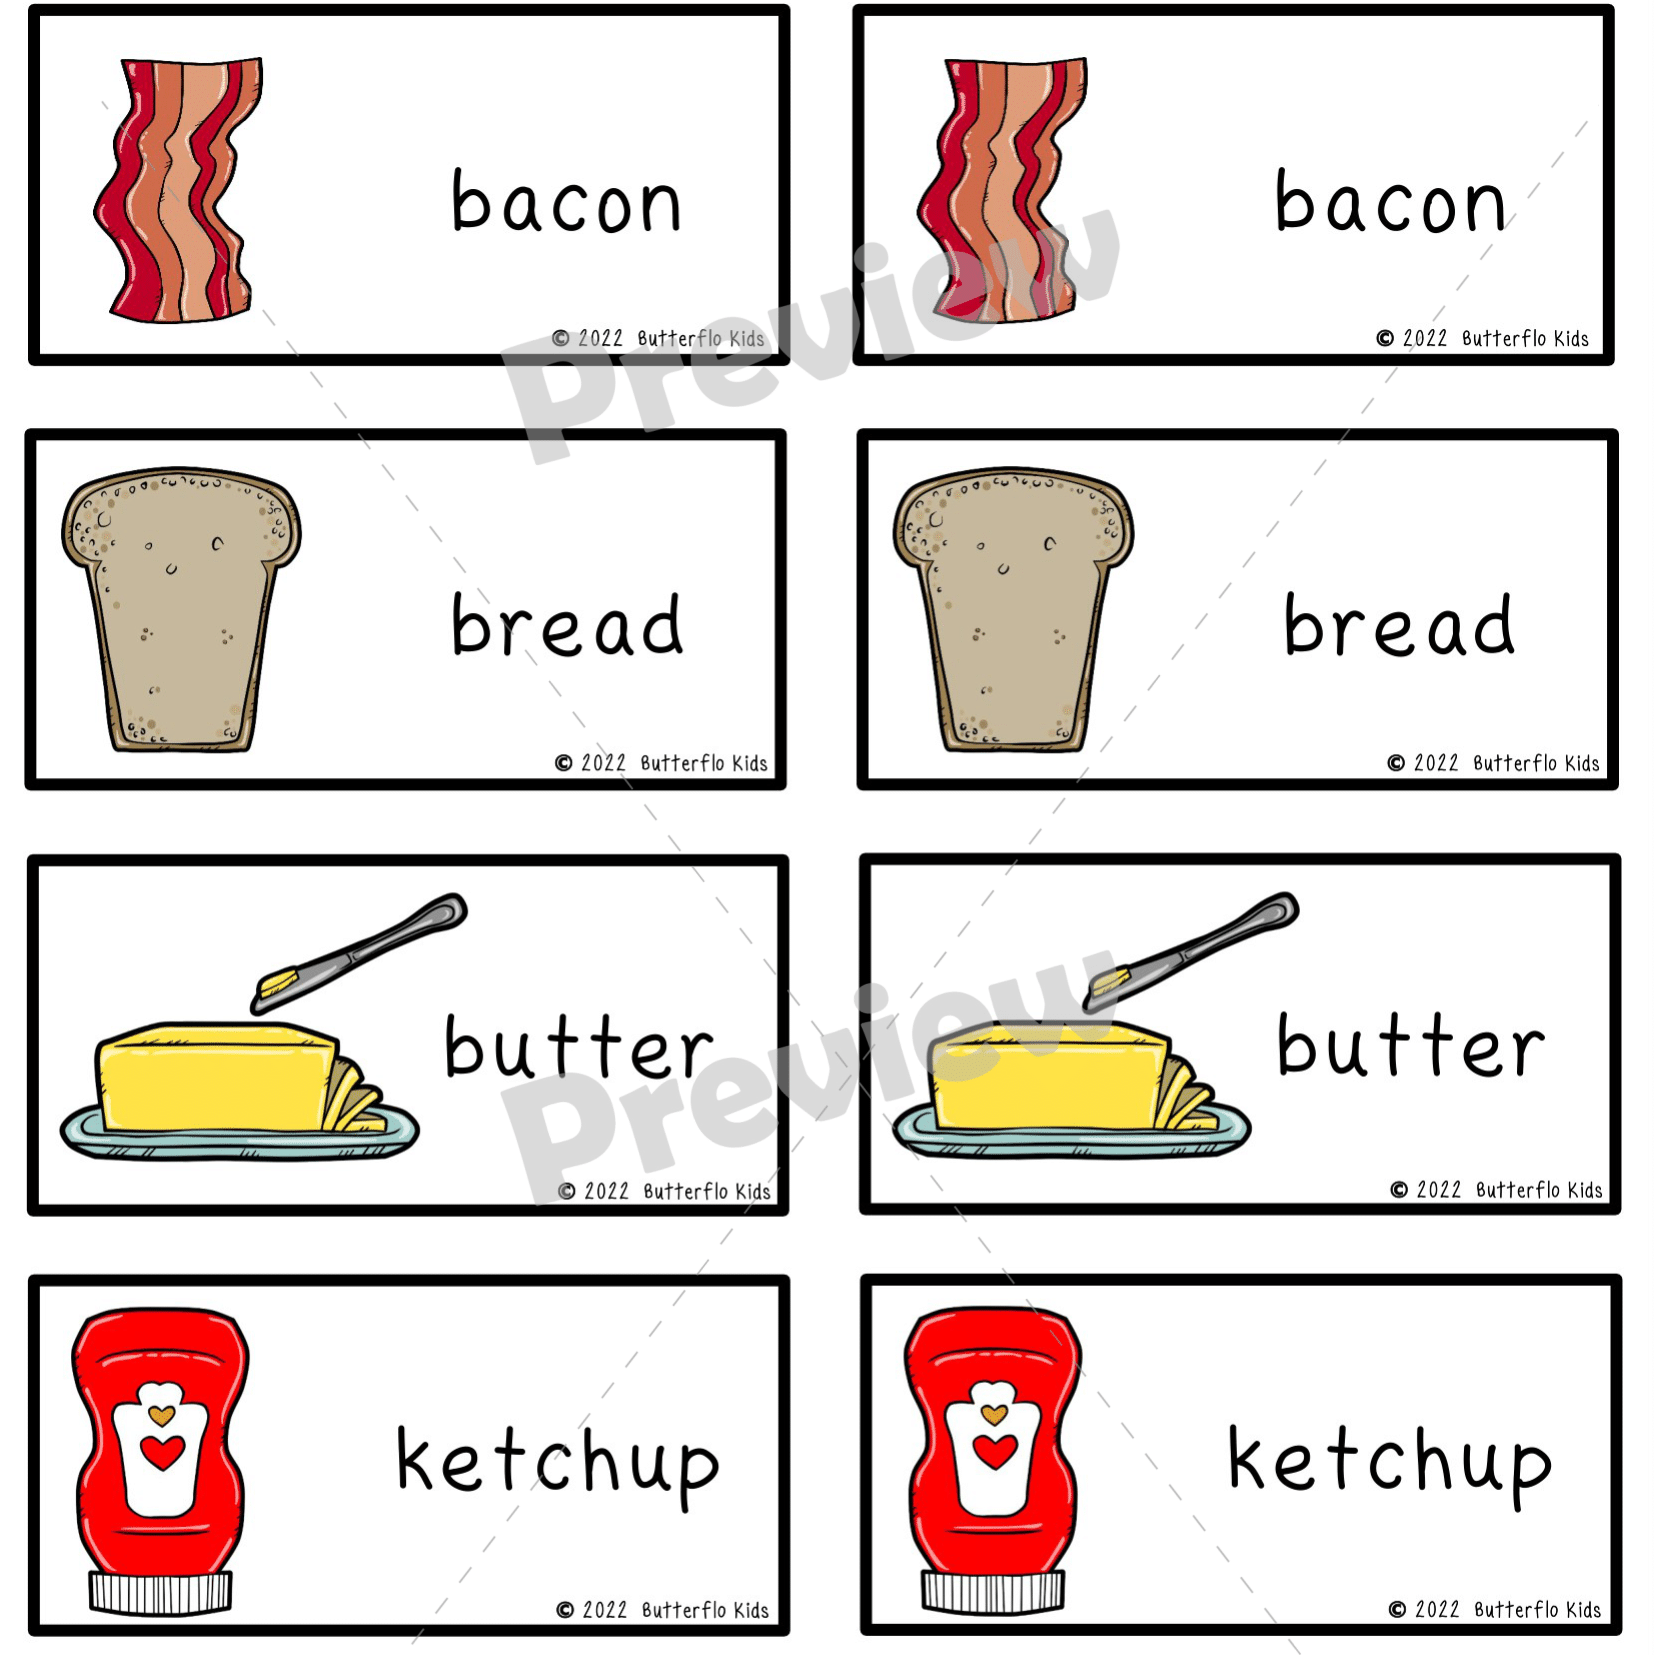 how to make a bacon sandwich for kids flashcards